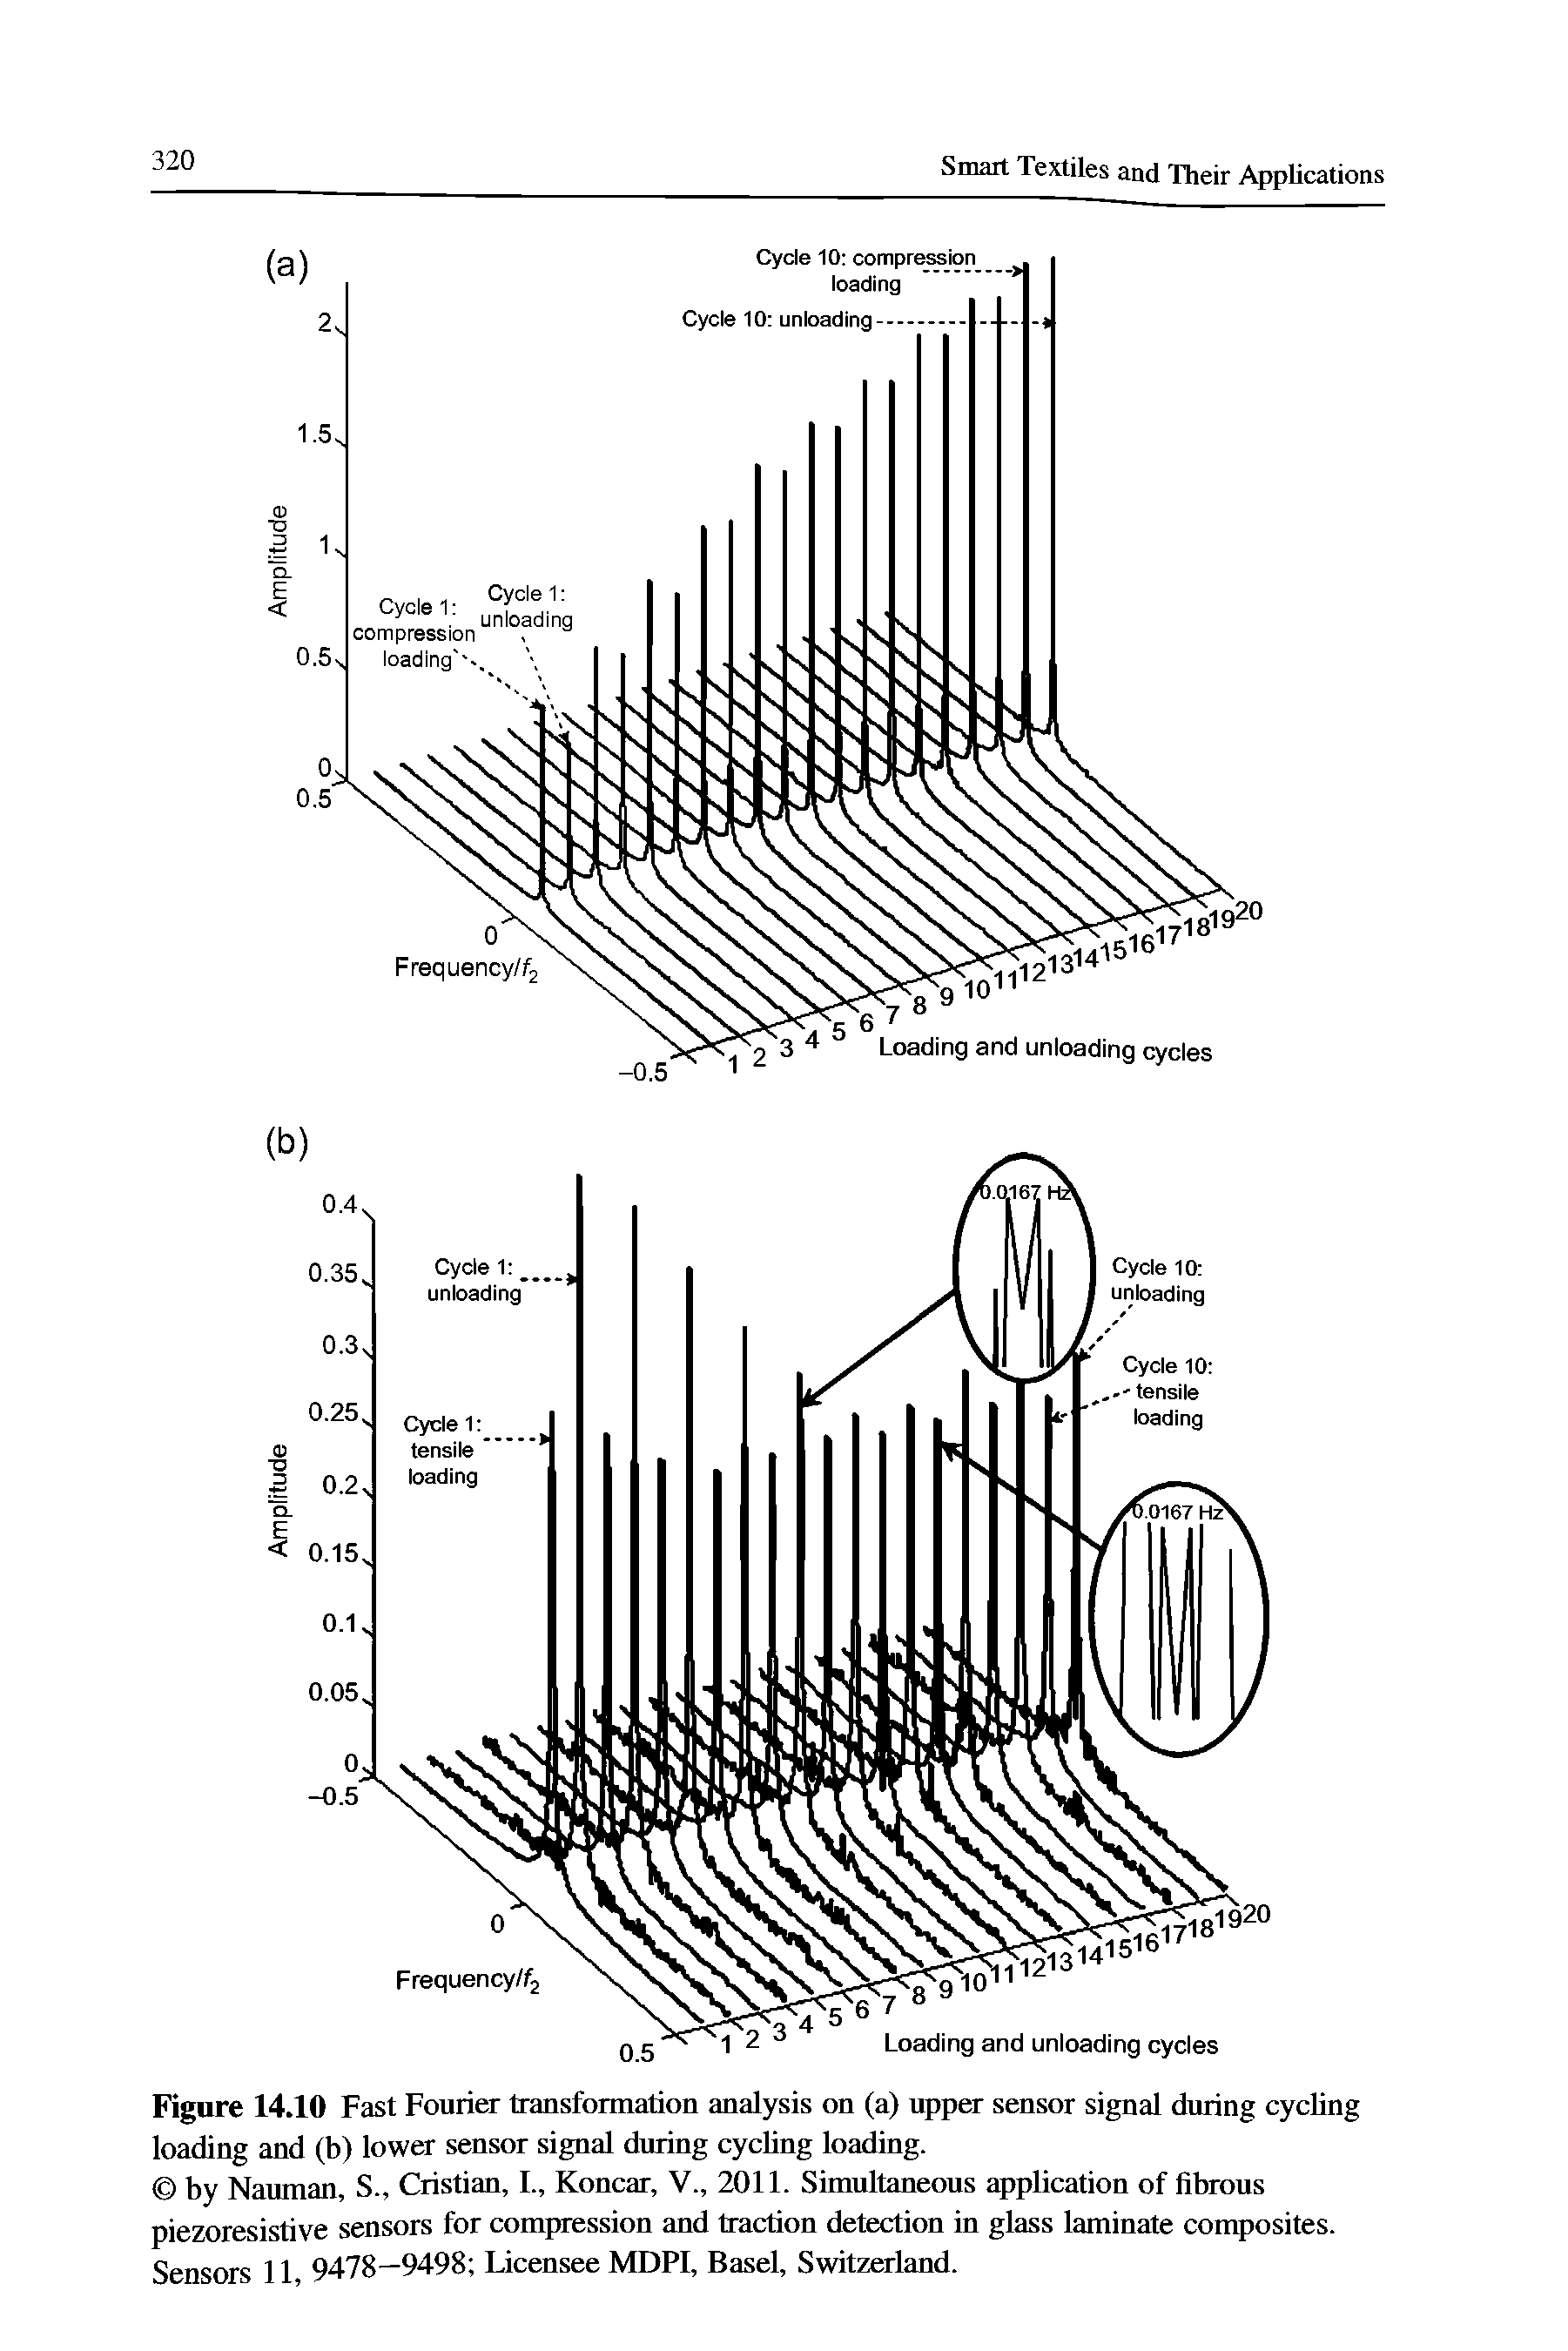 Figure 14.10 Fast Fourier transformation analysis on (a) upper sensor signal during cycling loading and (b) lower sensor signal during cycling loading.